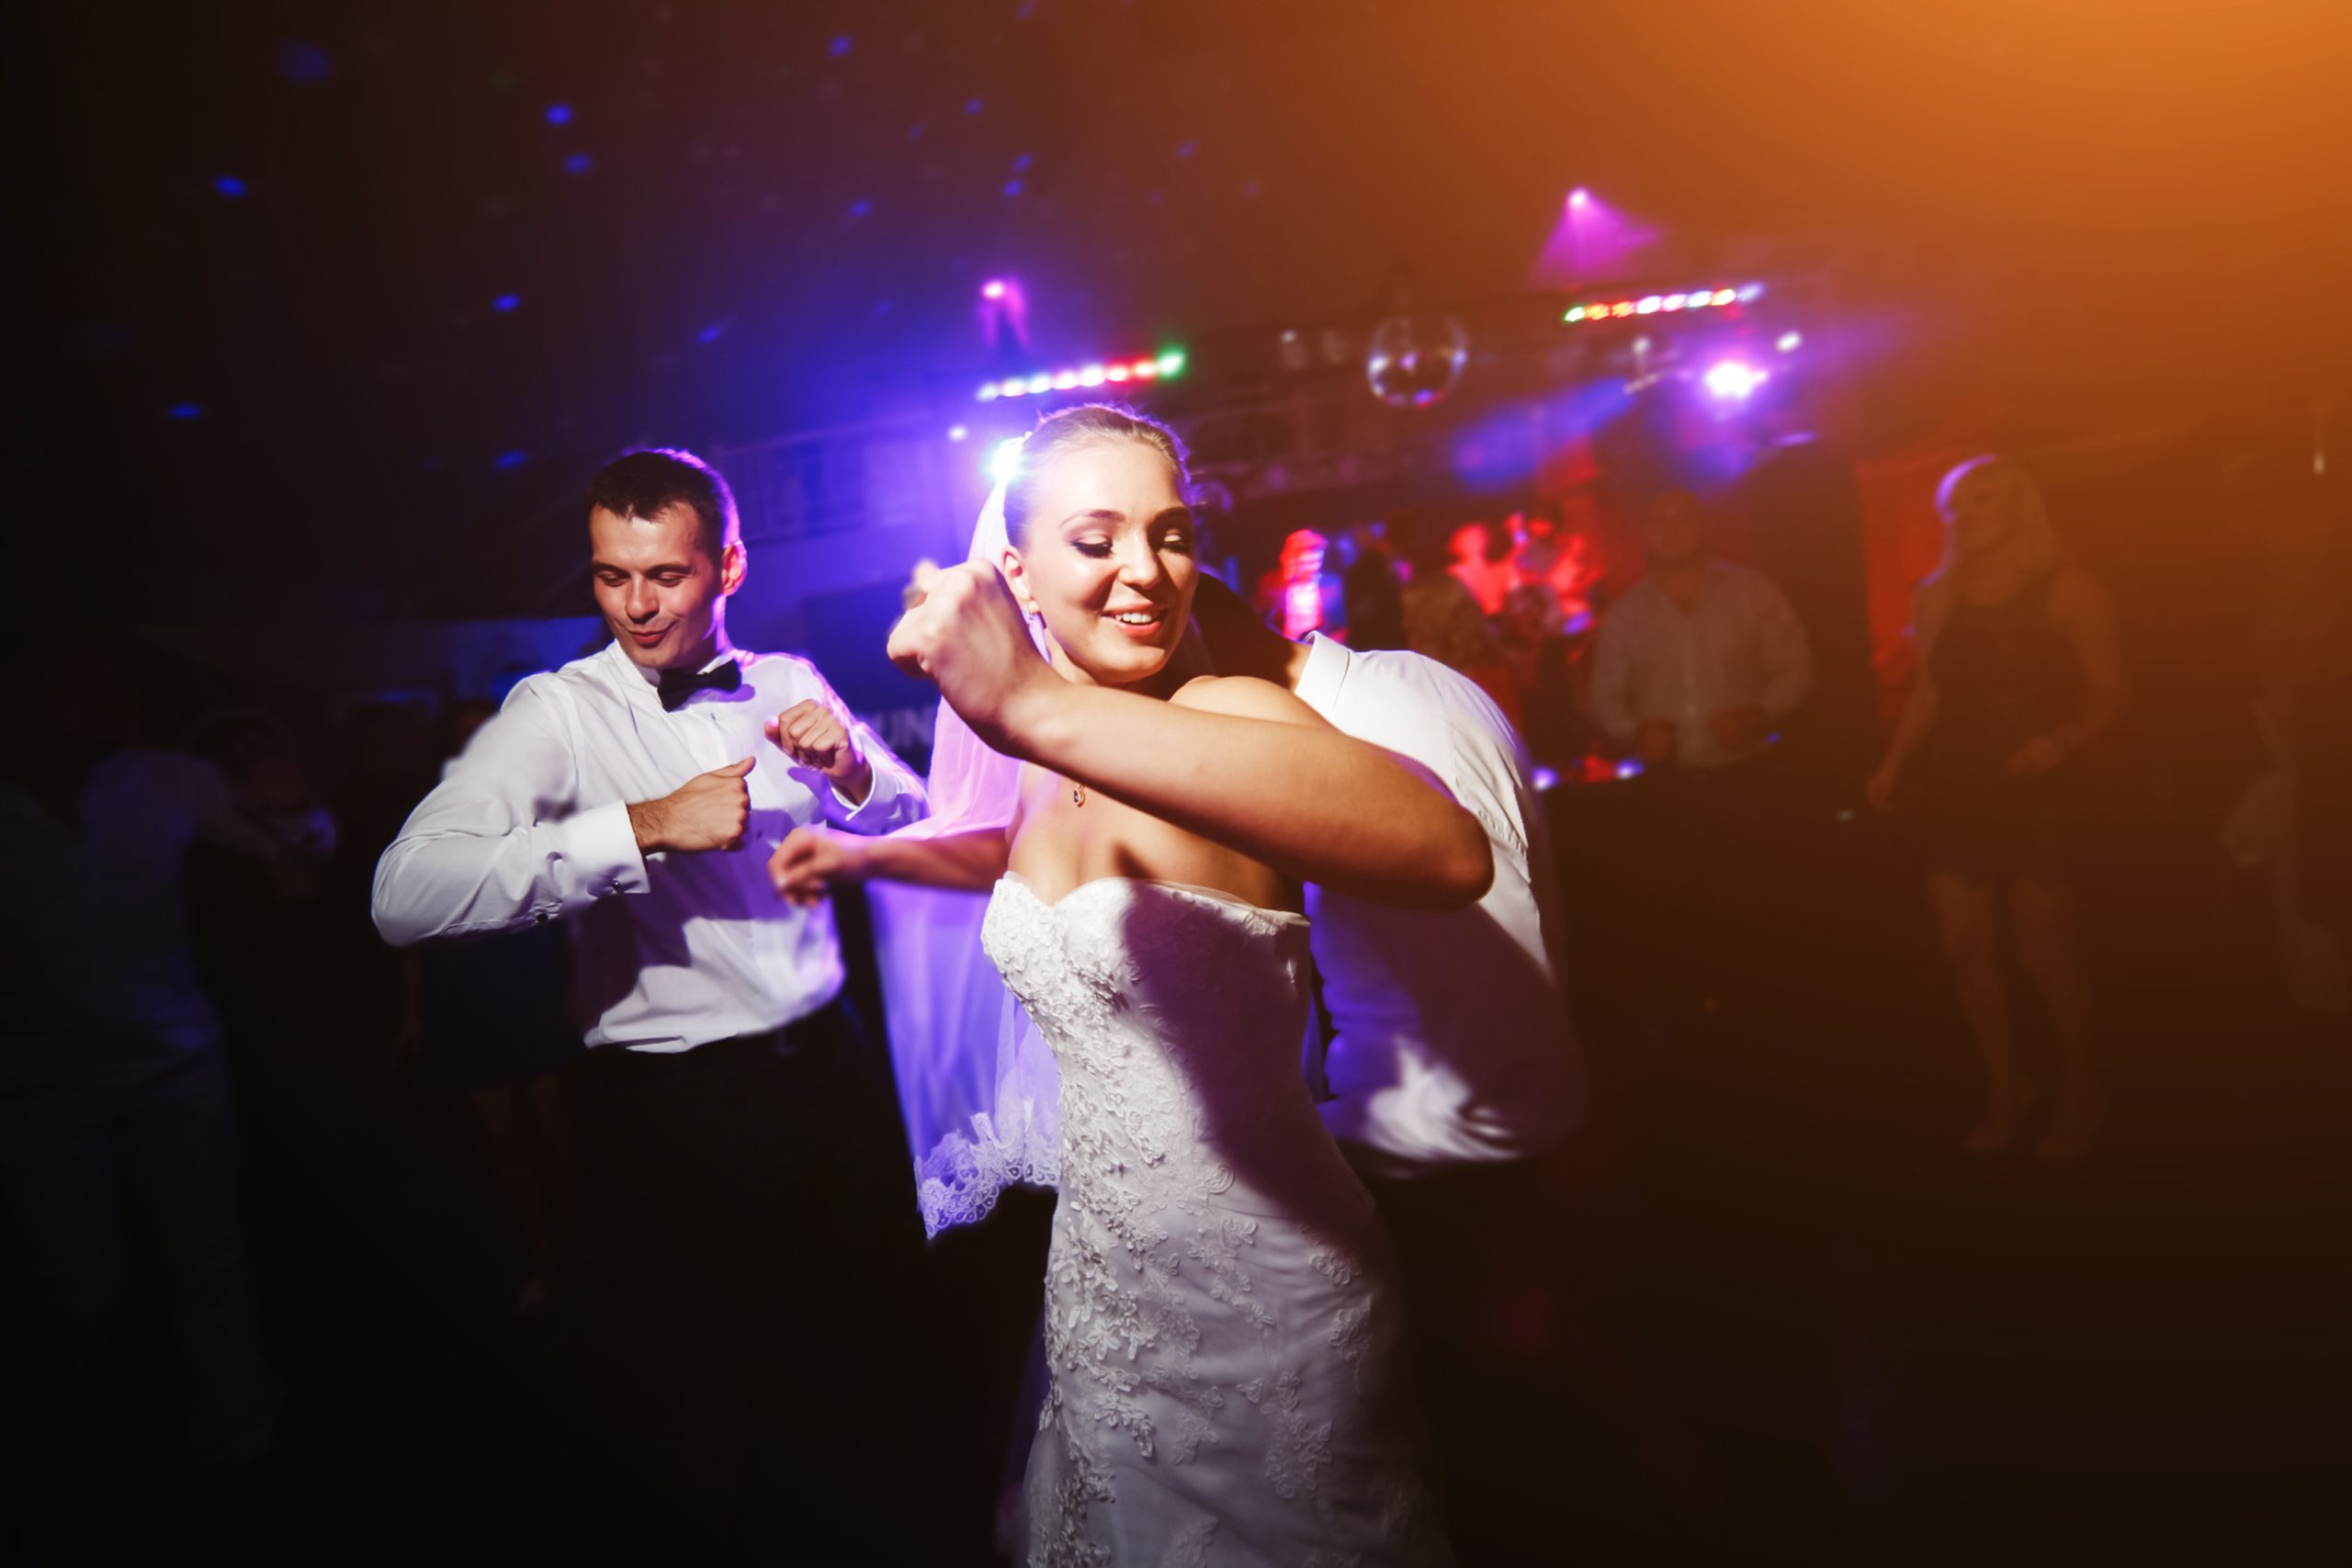 bride and groom encourage others to dance at their wedding